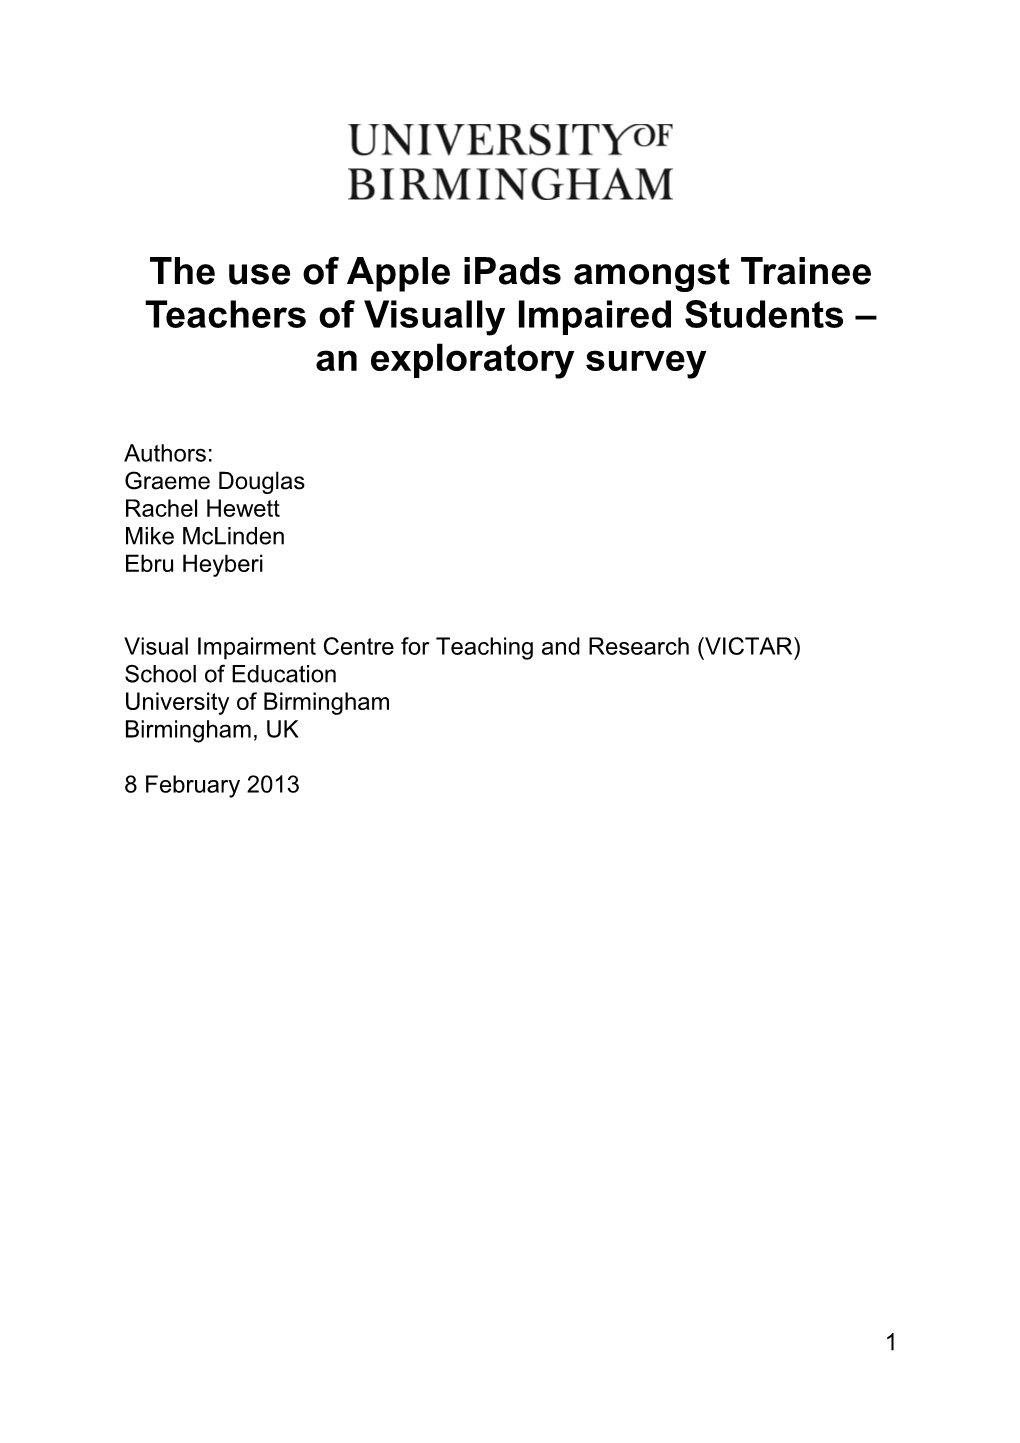 The Use of Apple Ipads Amongst Trainee Teachers of Visually Impaired Students an Exploratory